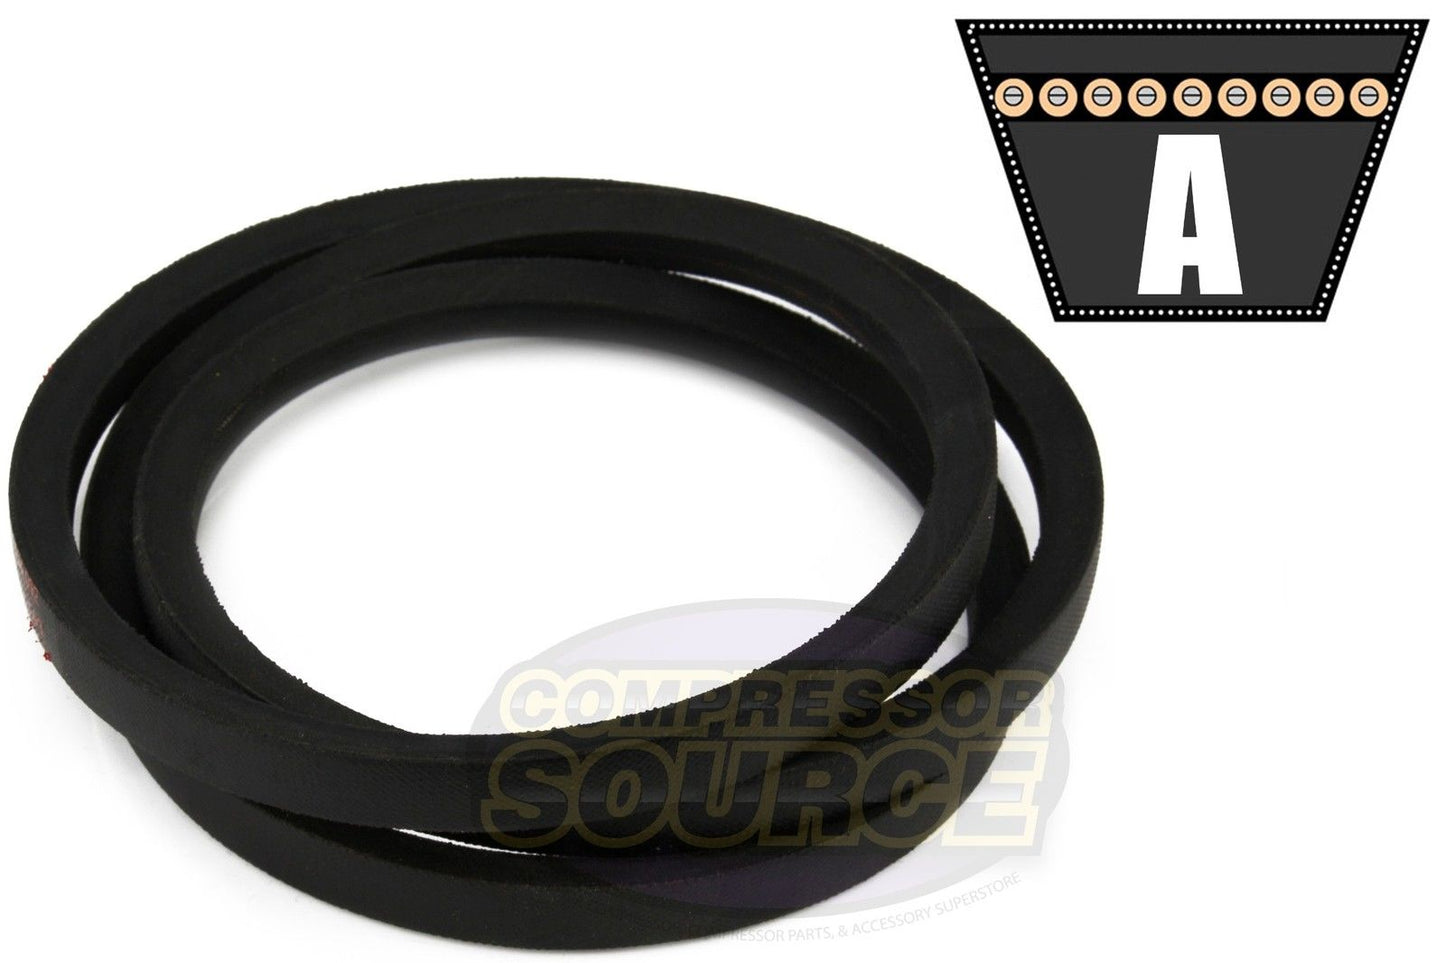 A51 Industrial & Lawn Mower 1/2" x 53" V Belt 4L530 Replacement High Quality